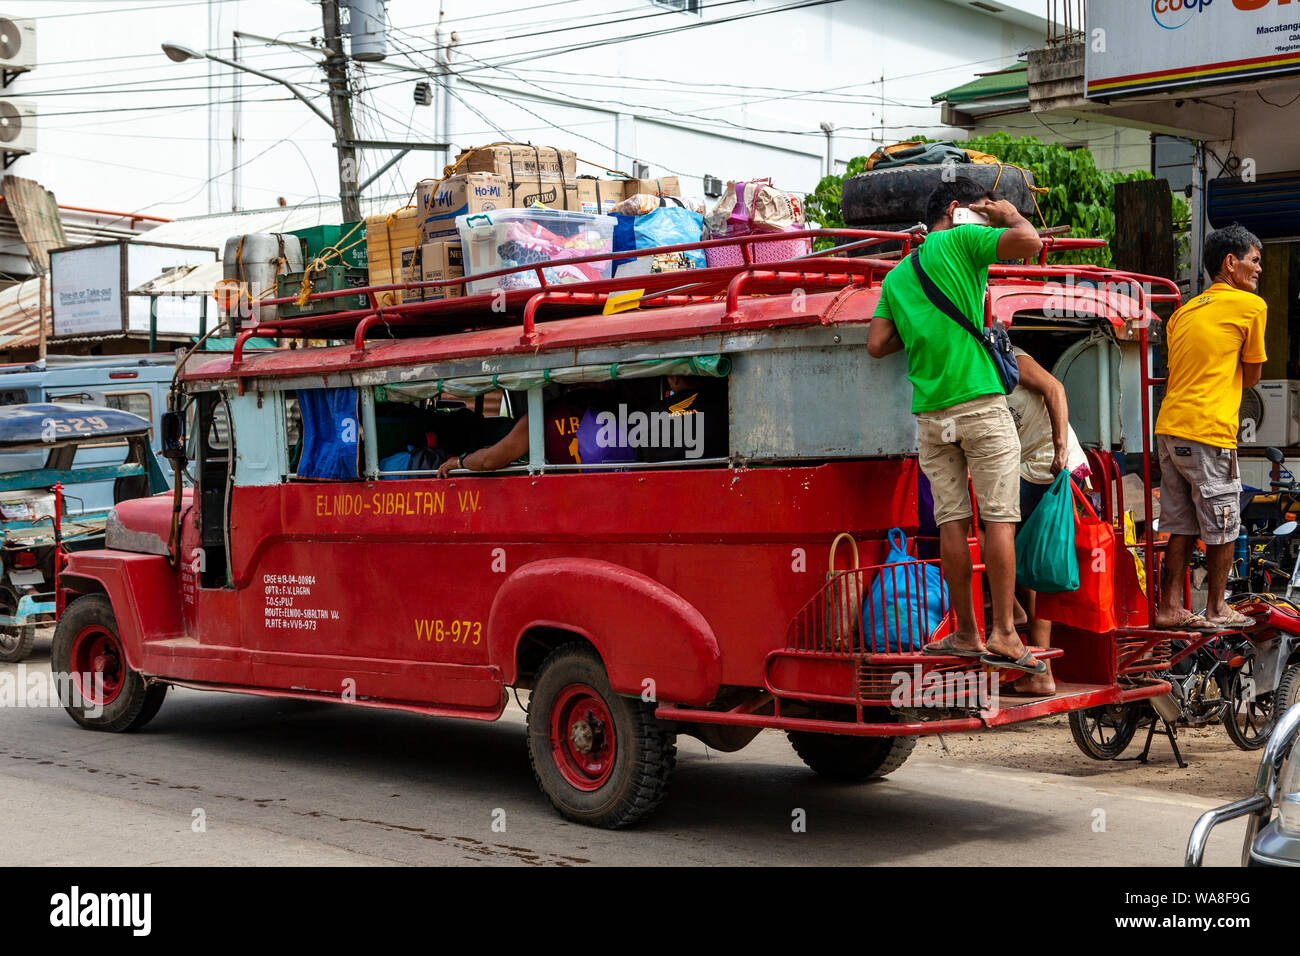 A Jeepney Stops To Let Off Passengers, El Nido, Palawan Island, The Philippines Stock Photo